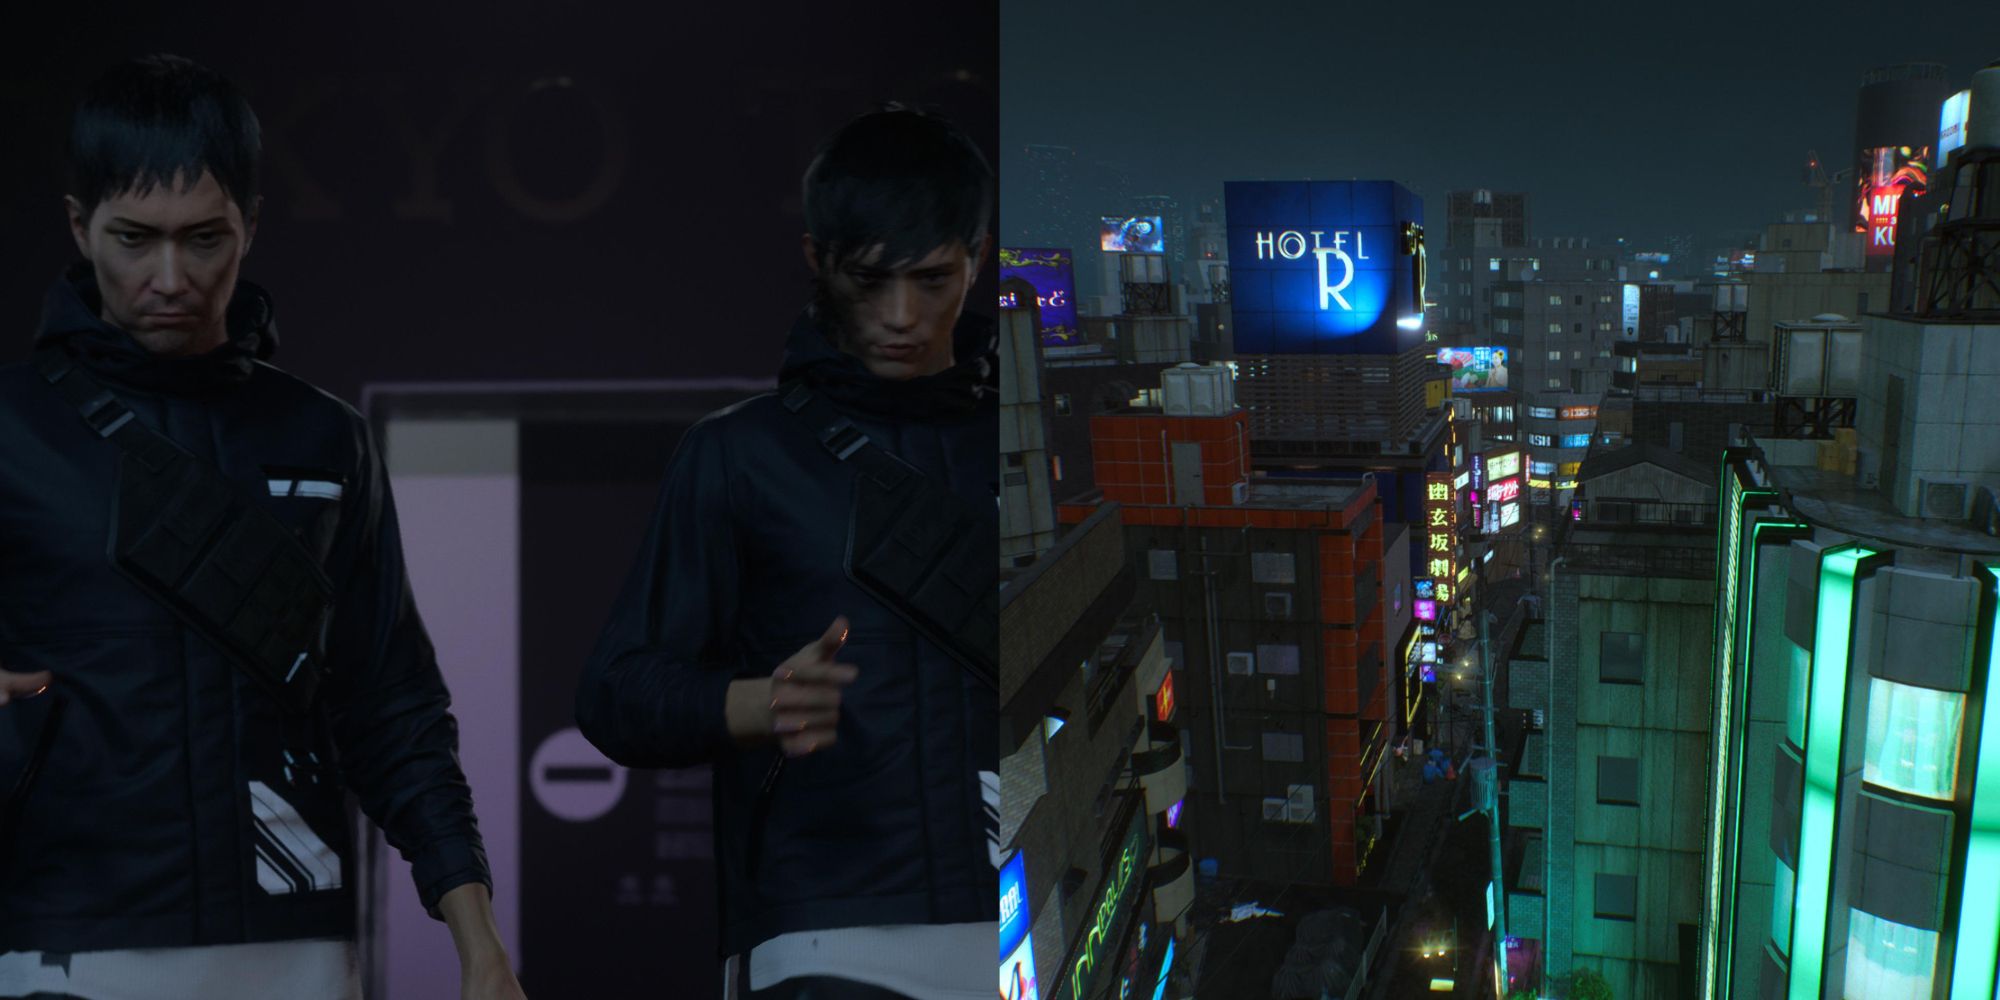 A collage showing KK and the protagonist on the left, and a screenshot of the city from the roof a building on the right.